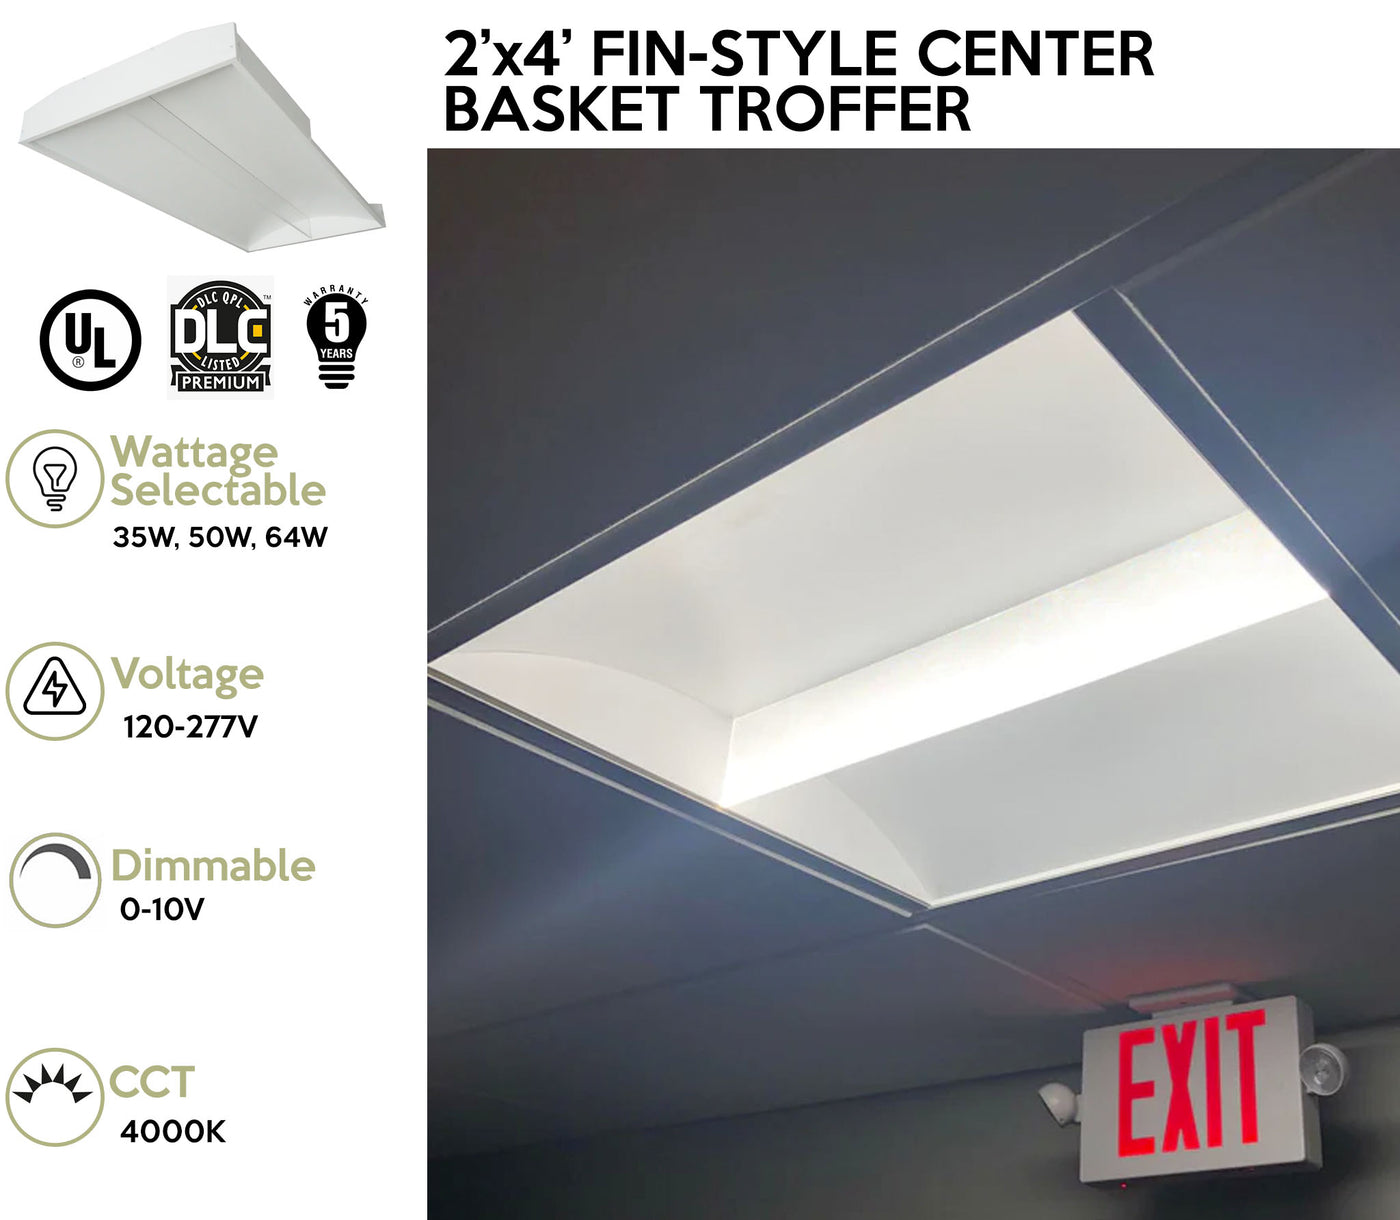 2 x 4 Foot LED Fin-Style Center Basket Troffer, Wattage Selectable: 35/50/64, 120-277V, 4000K